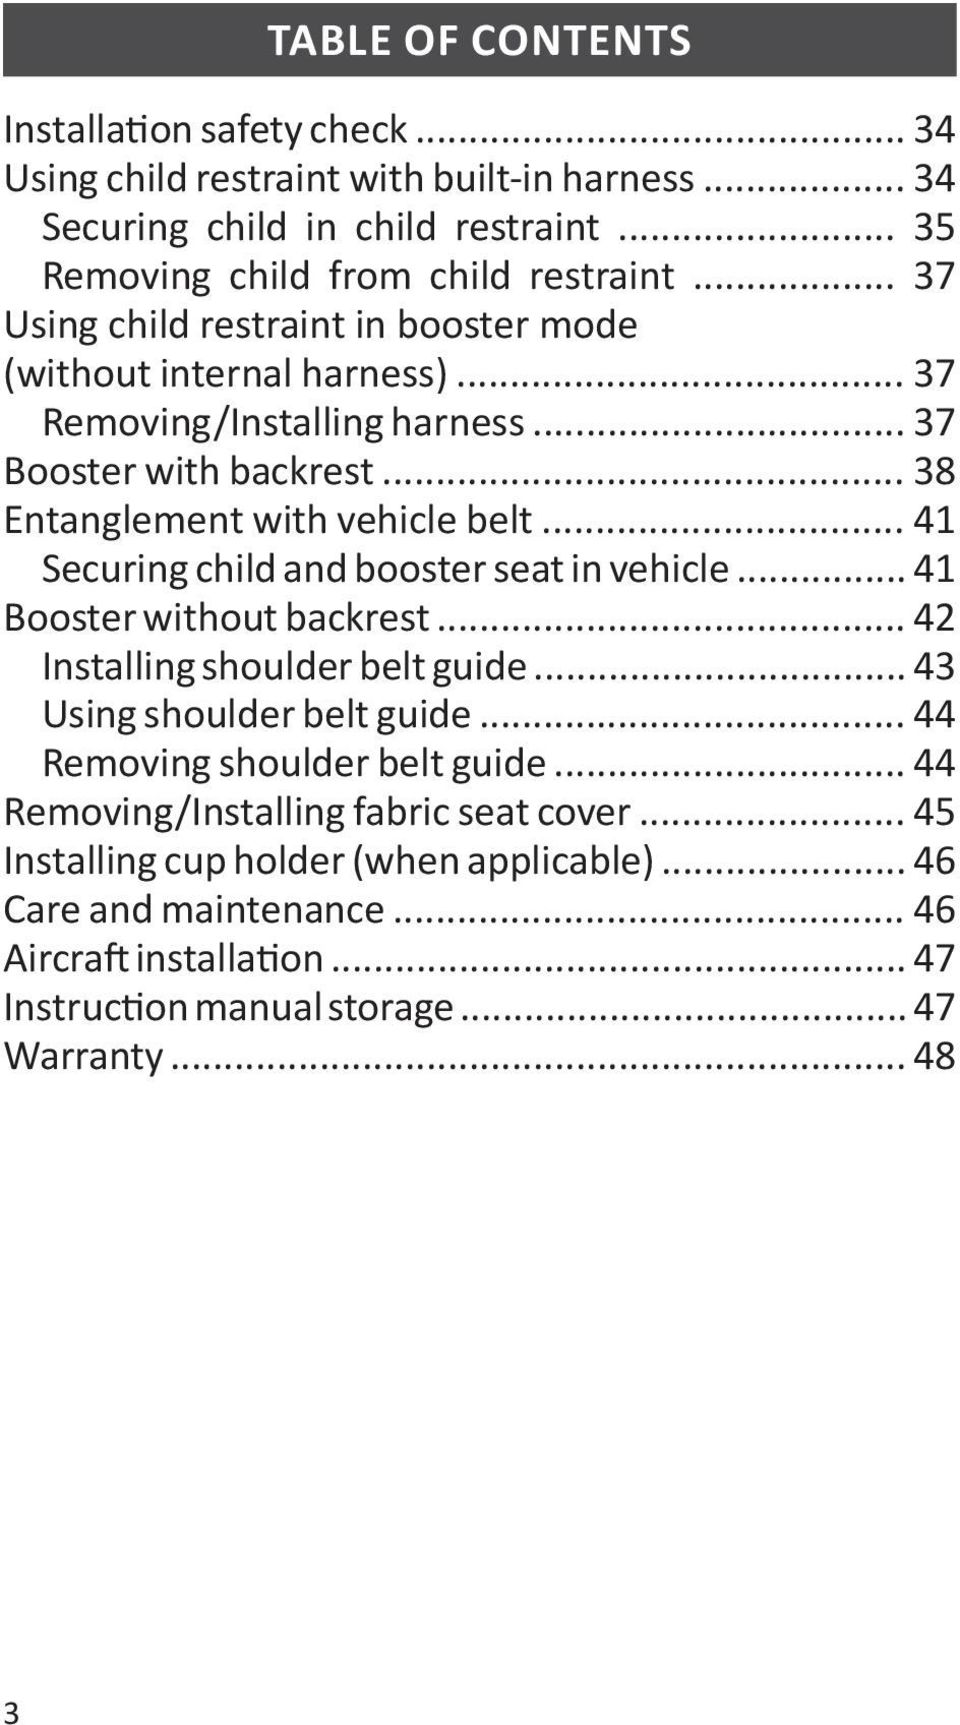 .. 41 Securing child and booster seat in vehicle... 41 Booster without backrest... 42 Installing shoulder belt guide... 43 Using shoulder belt guide... 44 Removing shoulder belt guide.